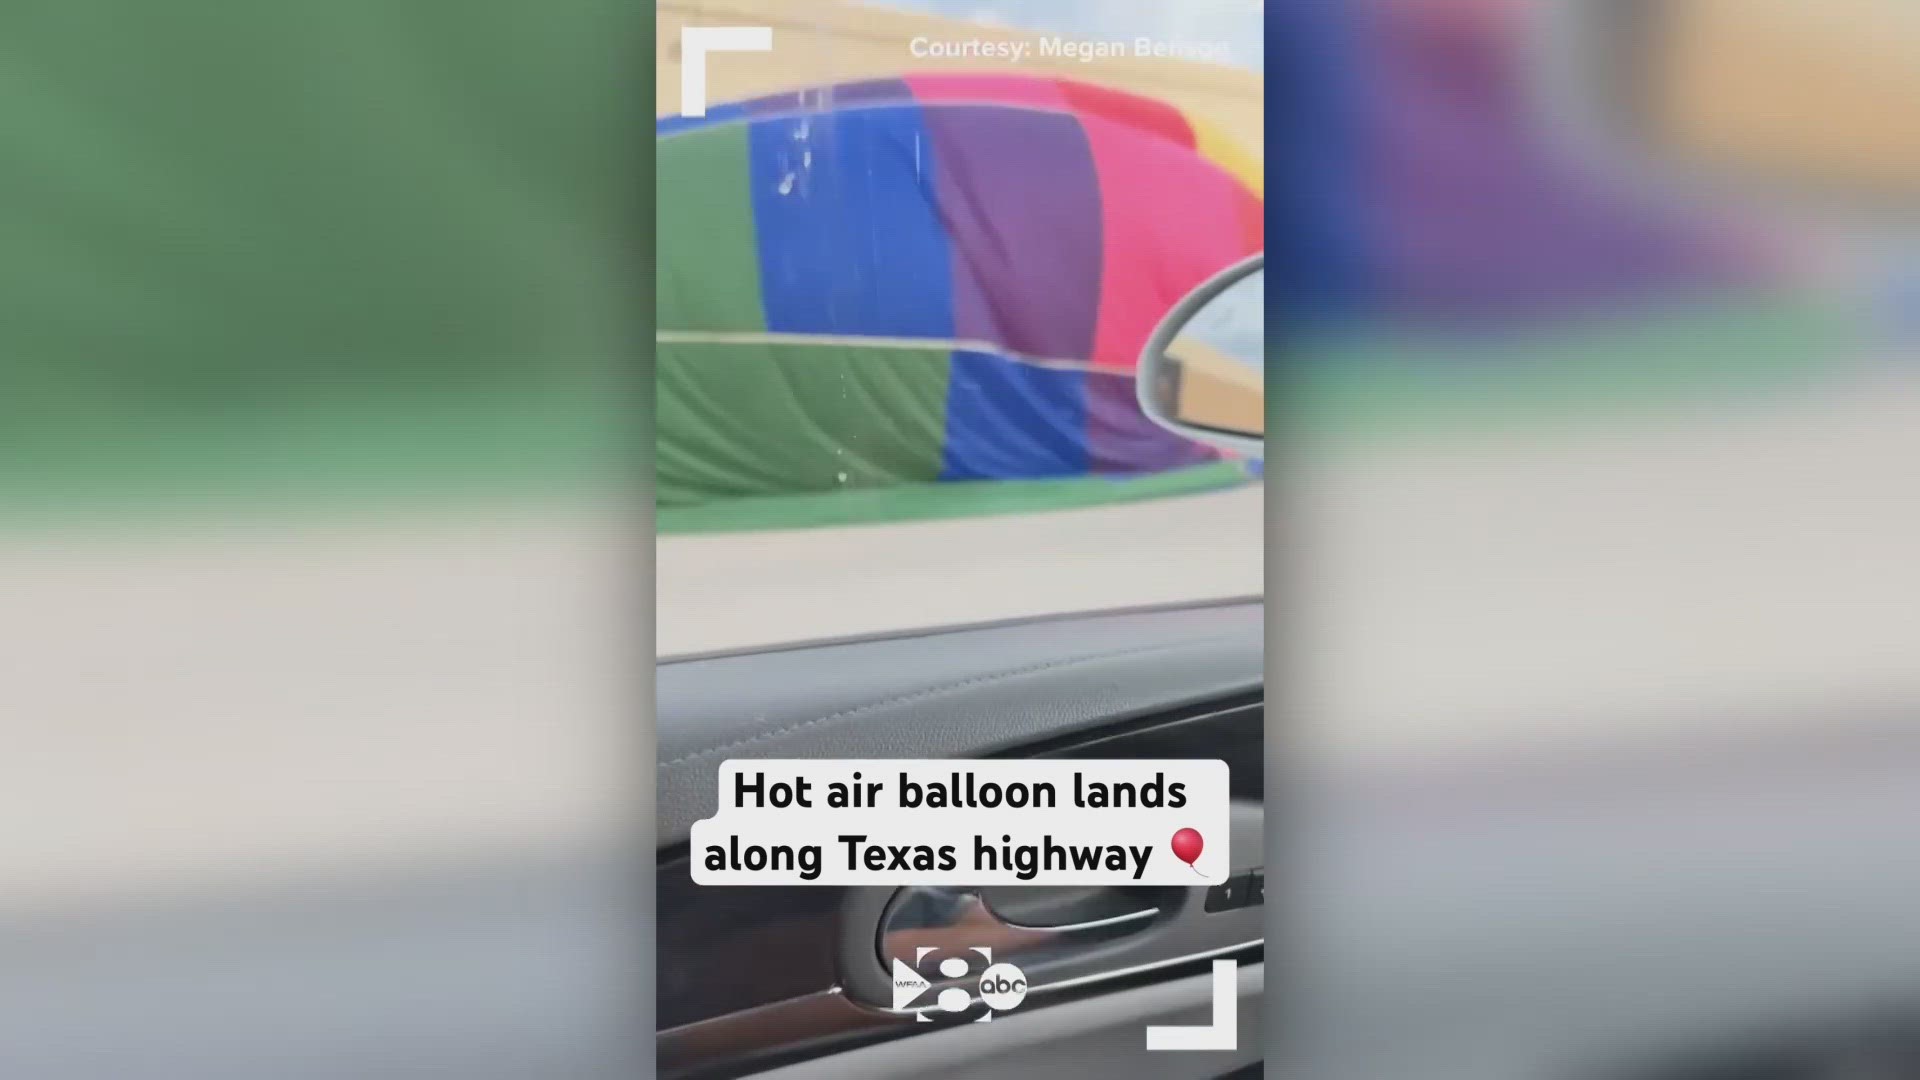 Video shared with WFAA shows a hot air balloon landed on the access road along U.S. Highway 75 in McKinney on Saturday morning.